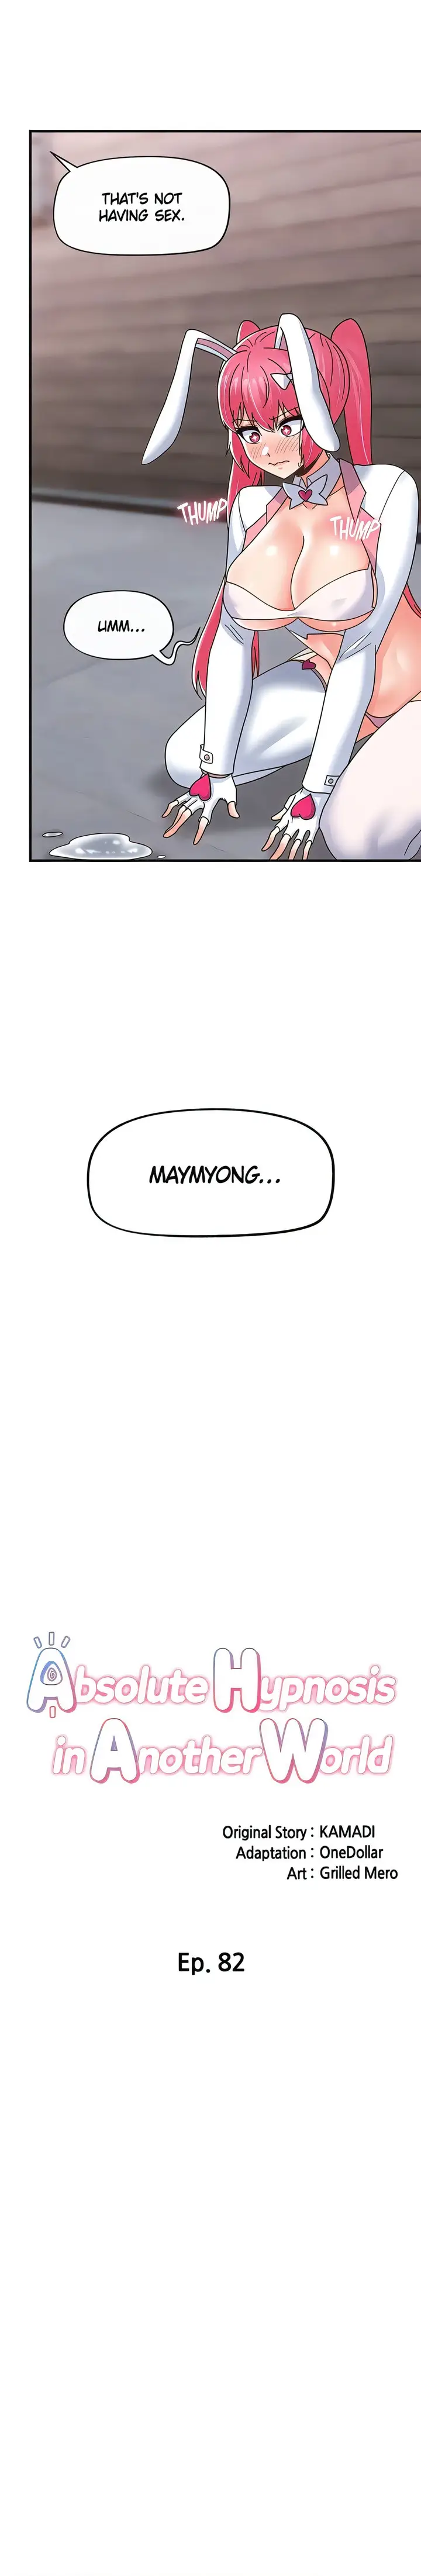 absolute-hypnosis-in-another-world-chap-82-3